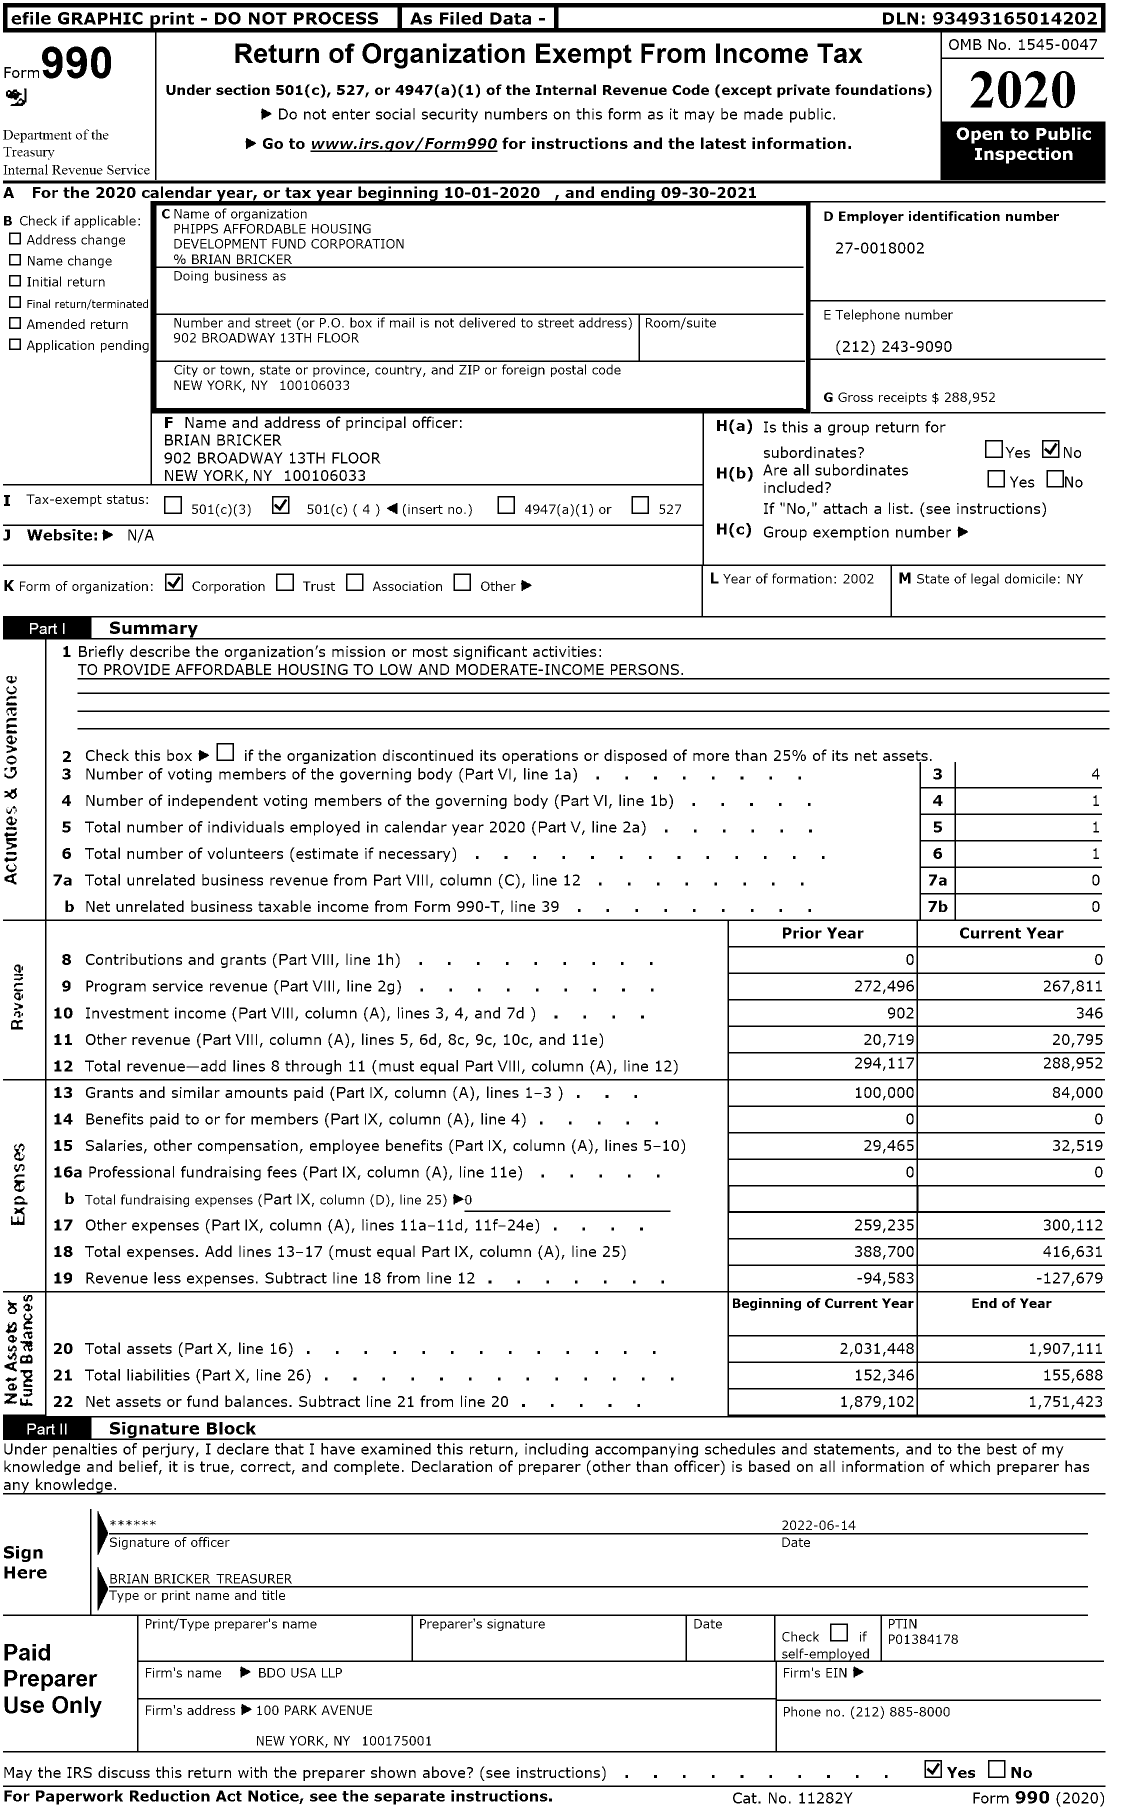 Image of first page of 2020 Form 990O for Phipps Affordable Housing Development Fund Corporation